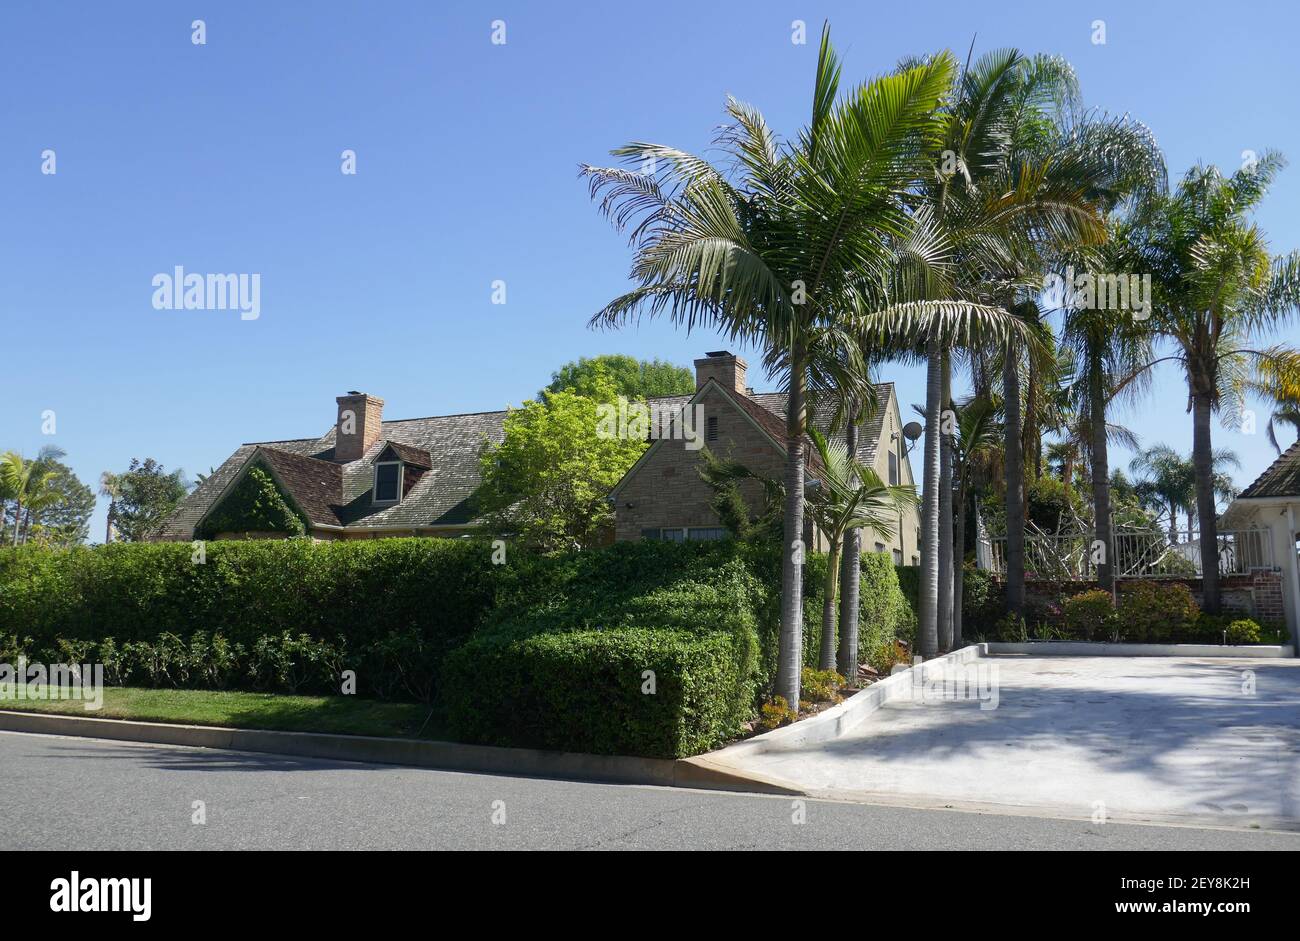 Los Angeles, California, USA 4th March 2021 A general view of atmosphere of musician/drummer of No Doubt Adrian Young's home/house on March 4, 2021 in Los Angeles, California, USA. Photo by Barry King/Alamy Stock Photo Stock Photo